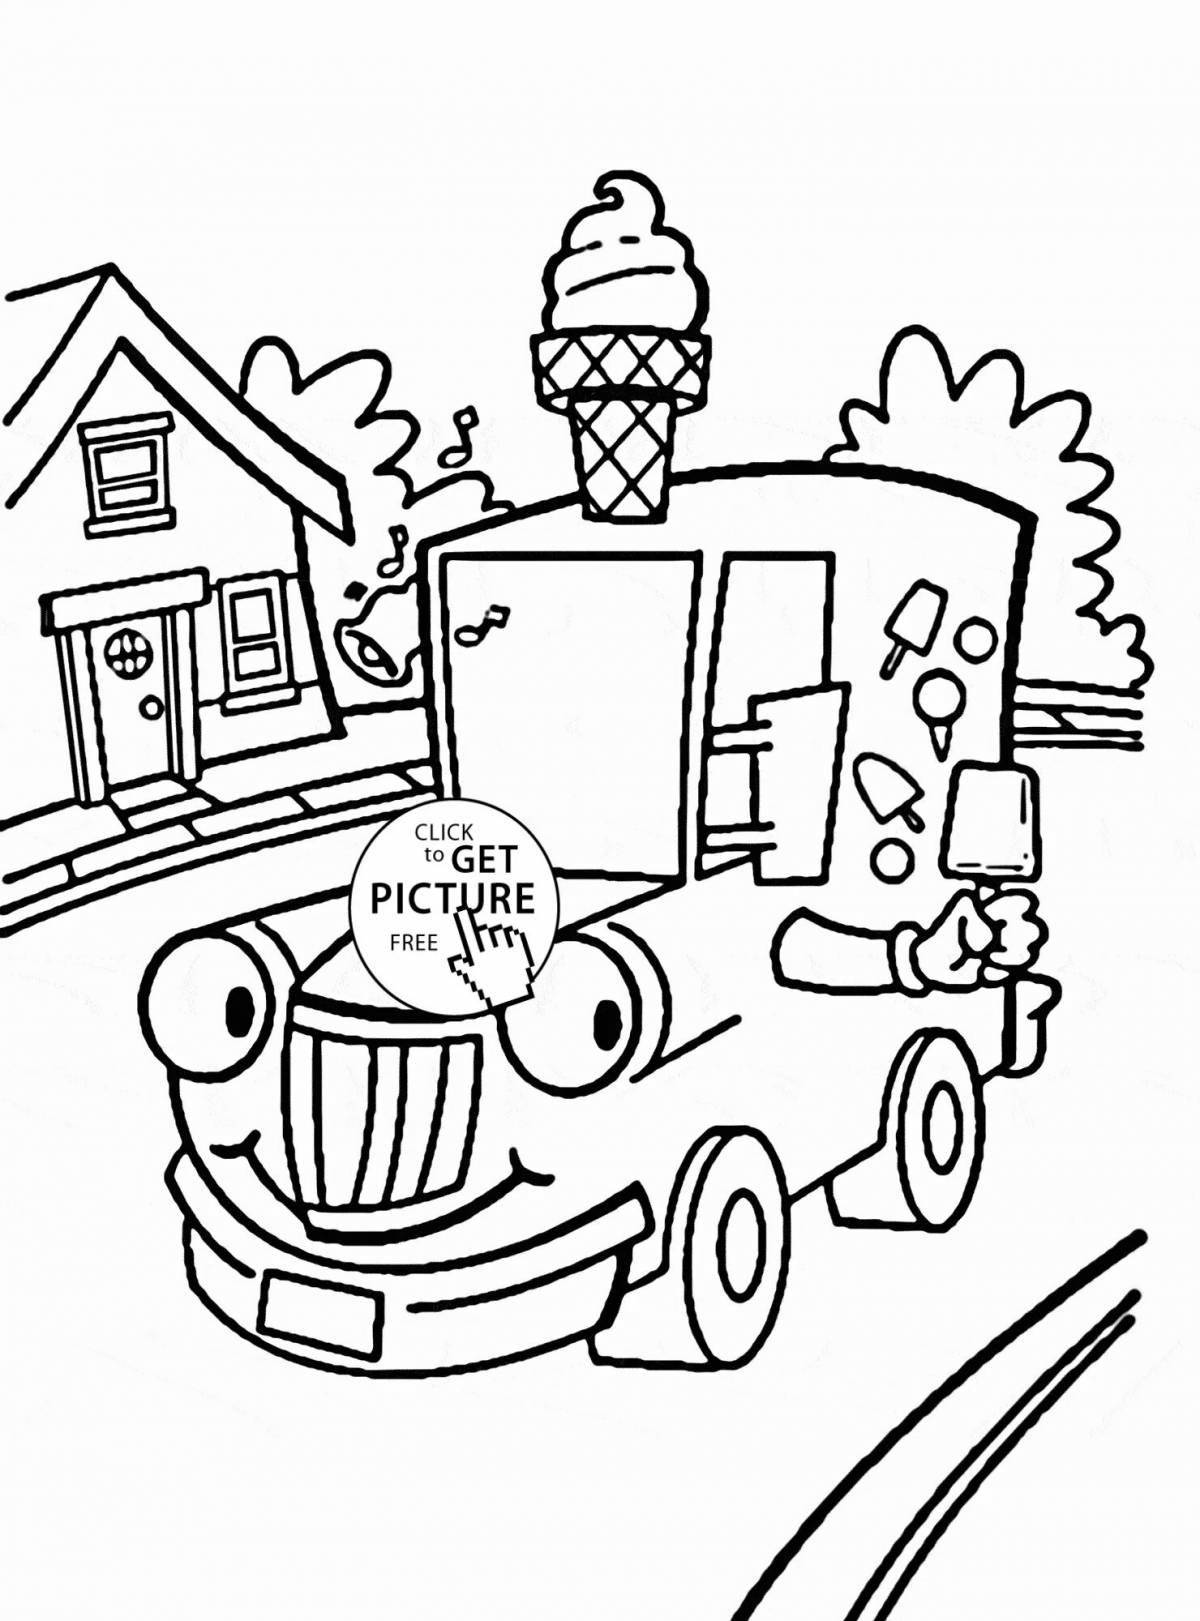 Fancy ice cream mask coloring page